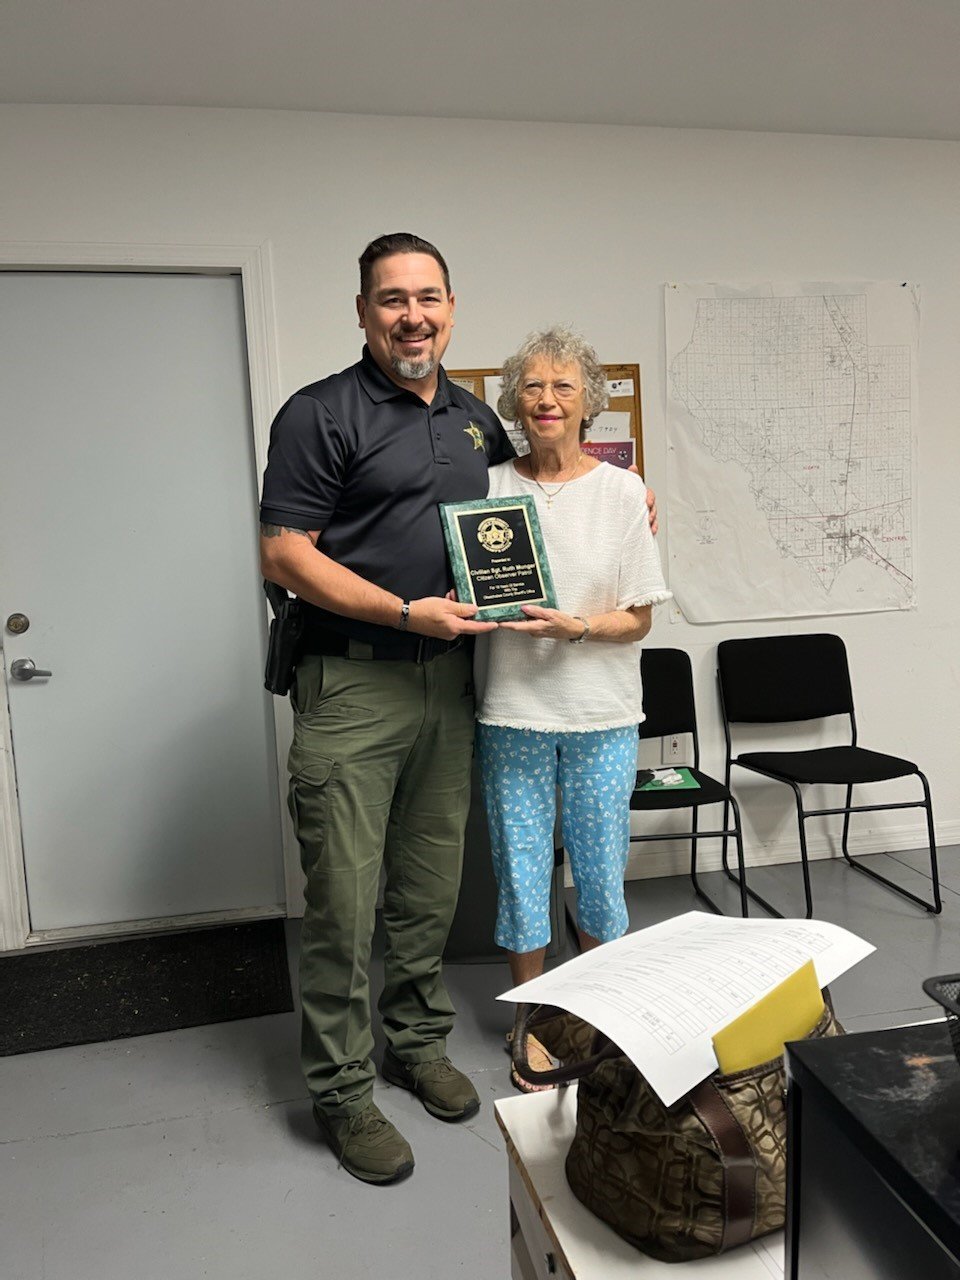 . During Sgt. Ruth Munger's  final meeting, the Sheriff's liaison, Corporal Jack Nash, presented her with a longevity appreciation plaque on behalf of us here and the Sheriff's Office.